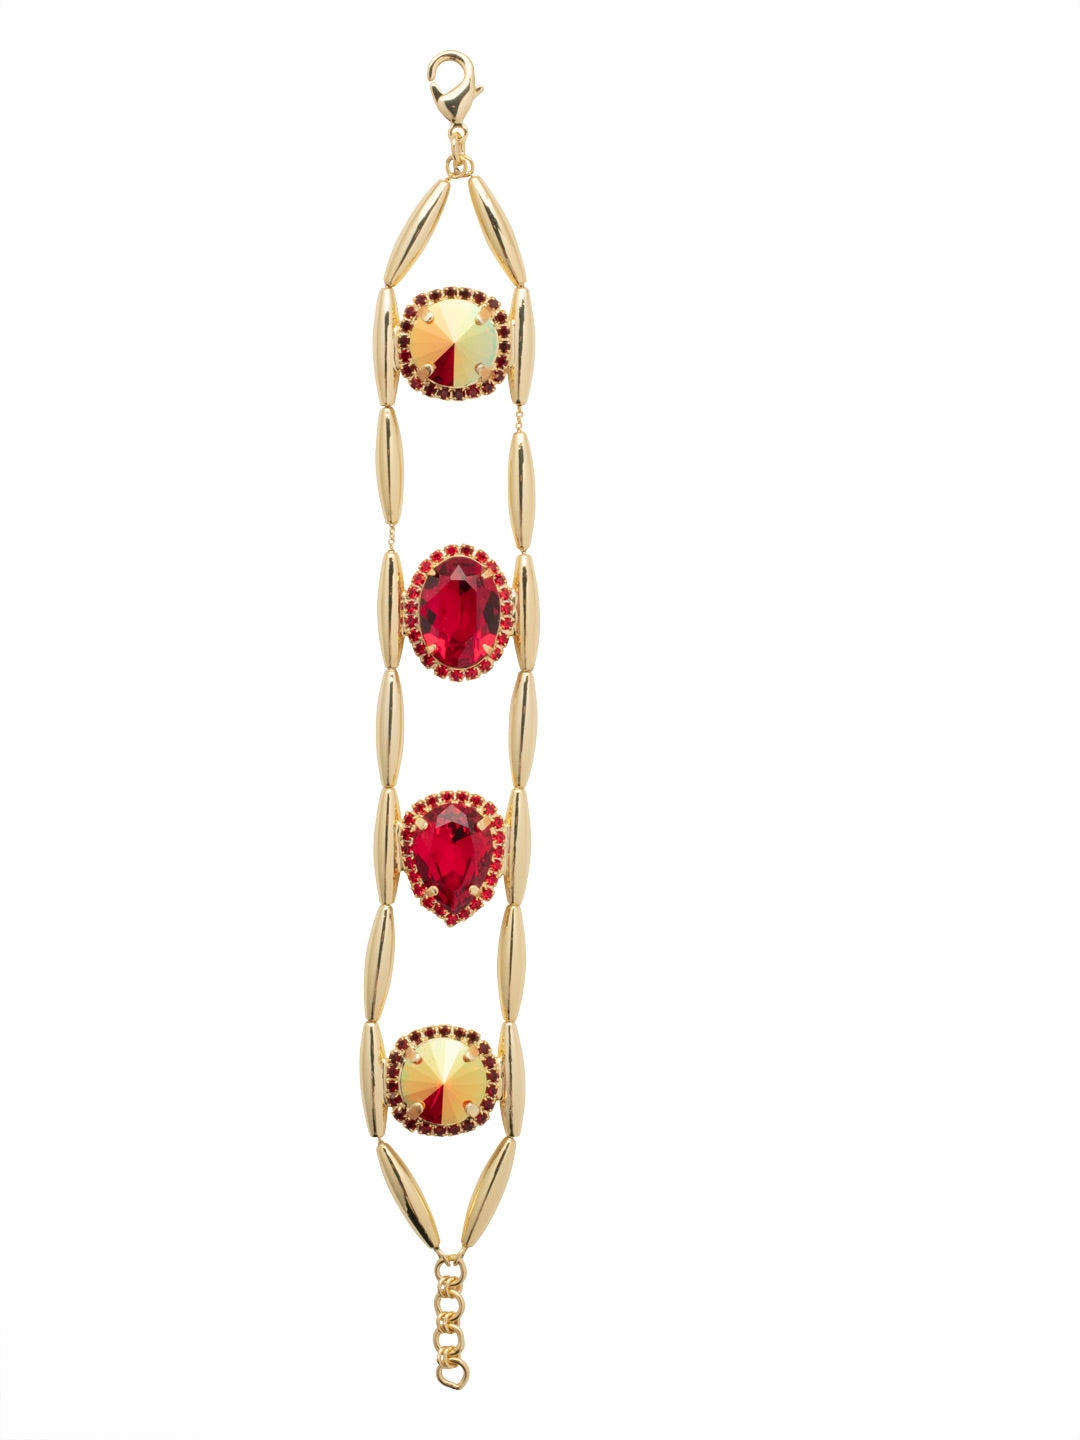 Giselle Tennis Bracelet - BFC80BGCB - <p>The Giselle Tennis Bracelet features a row of assorted halo cut crystals nestled between tubular chains, secured by a lobster claw clasp on an adjustable chain. From Sorrelli's Cranberry collection in our Bright Gold-tone finish.</p>